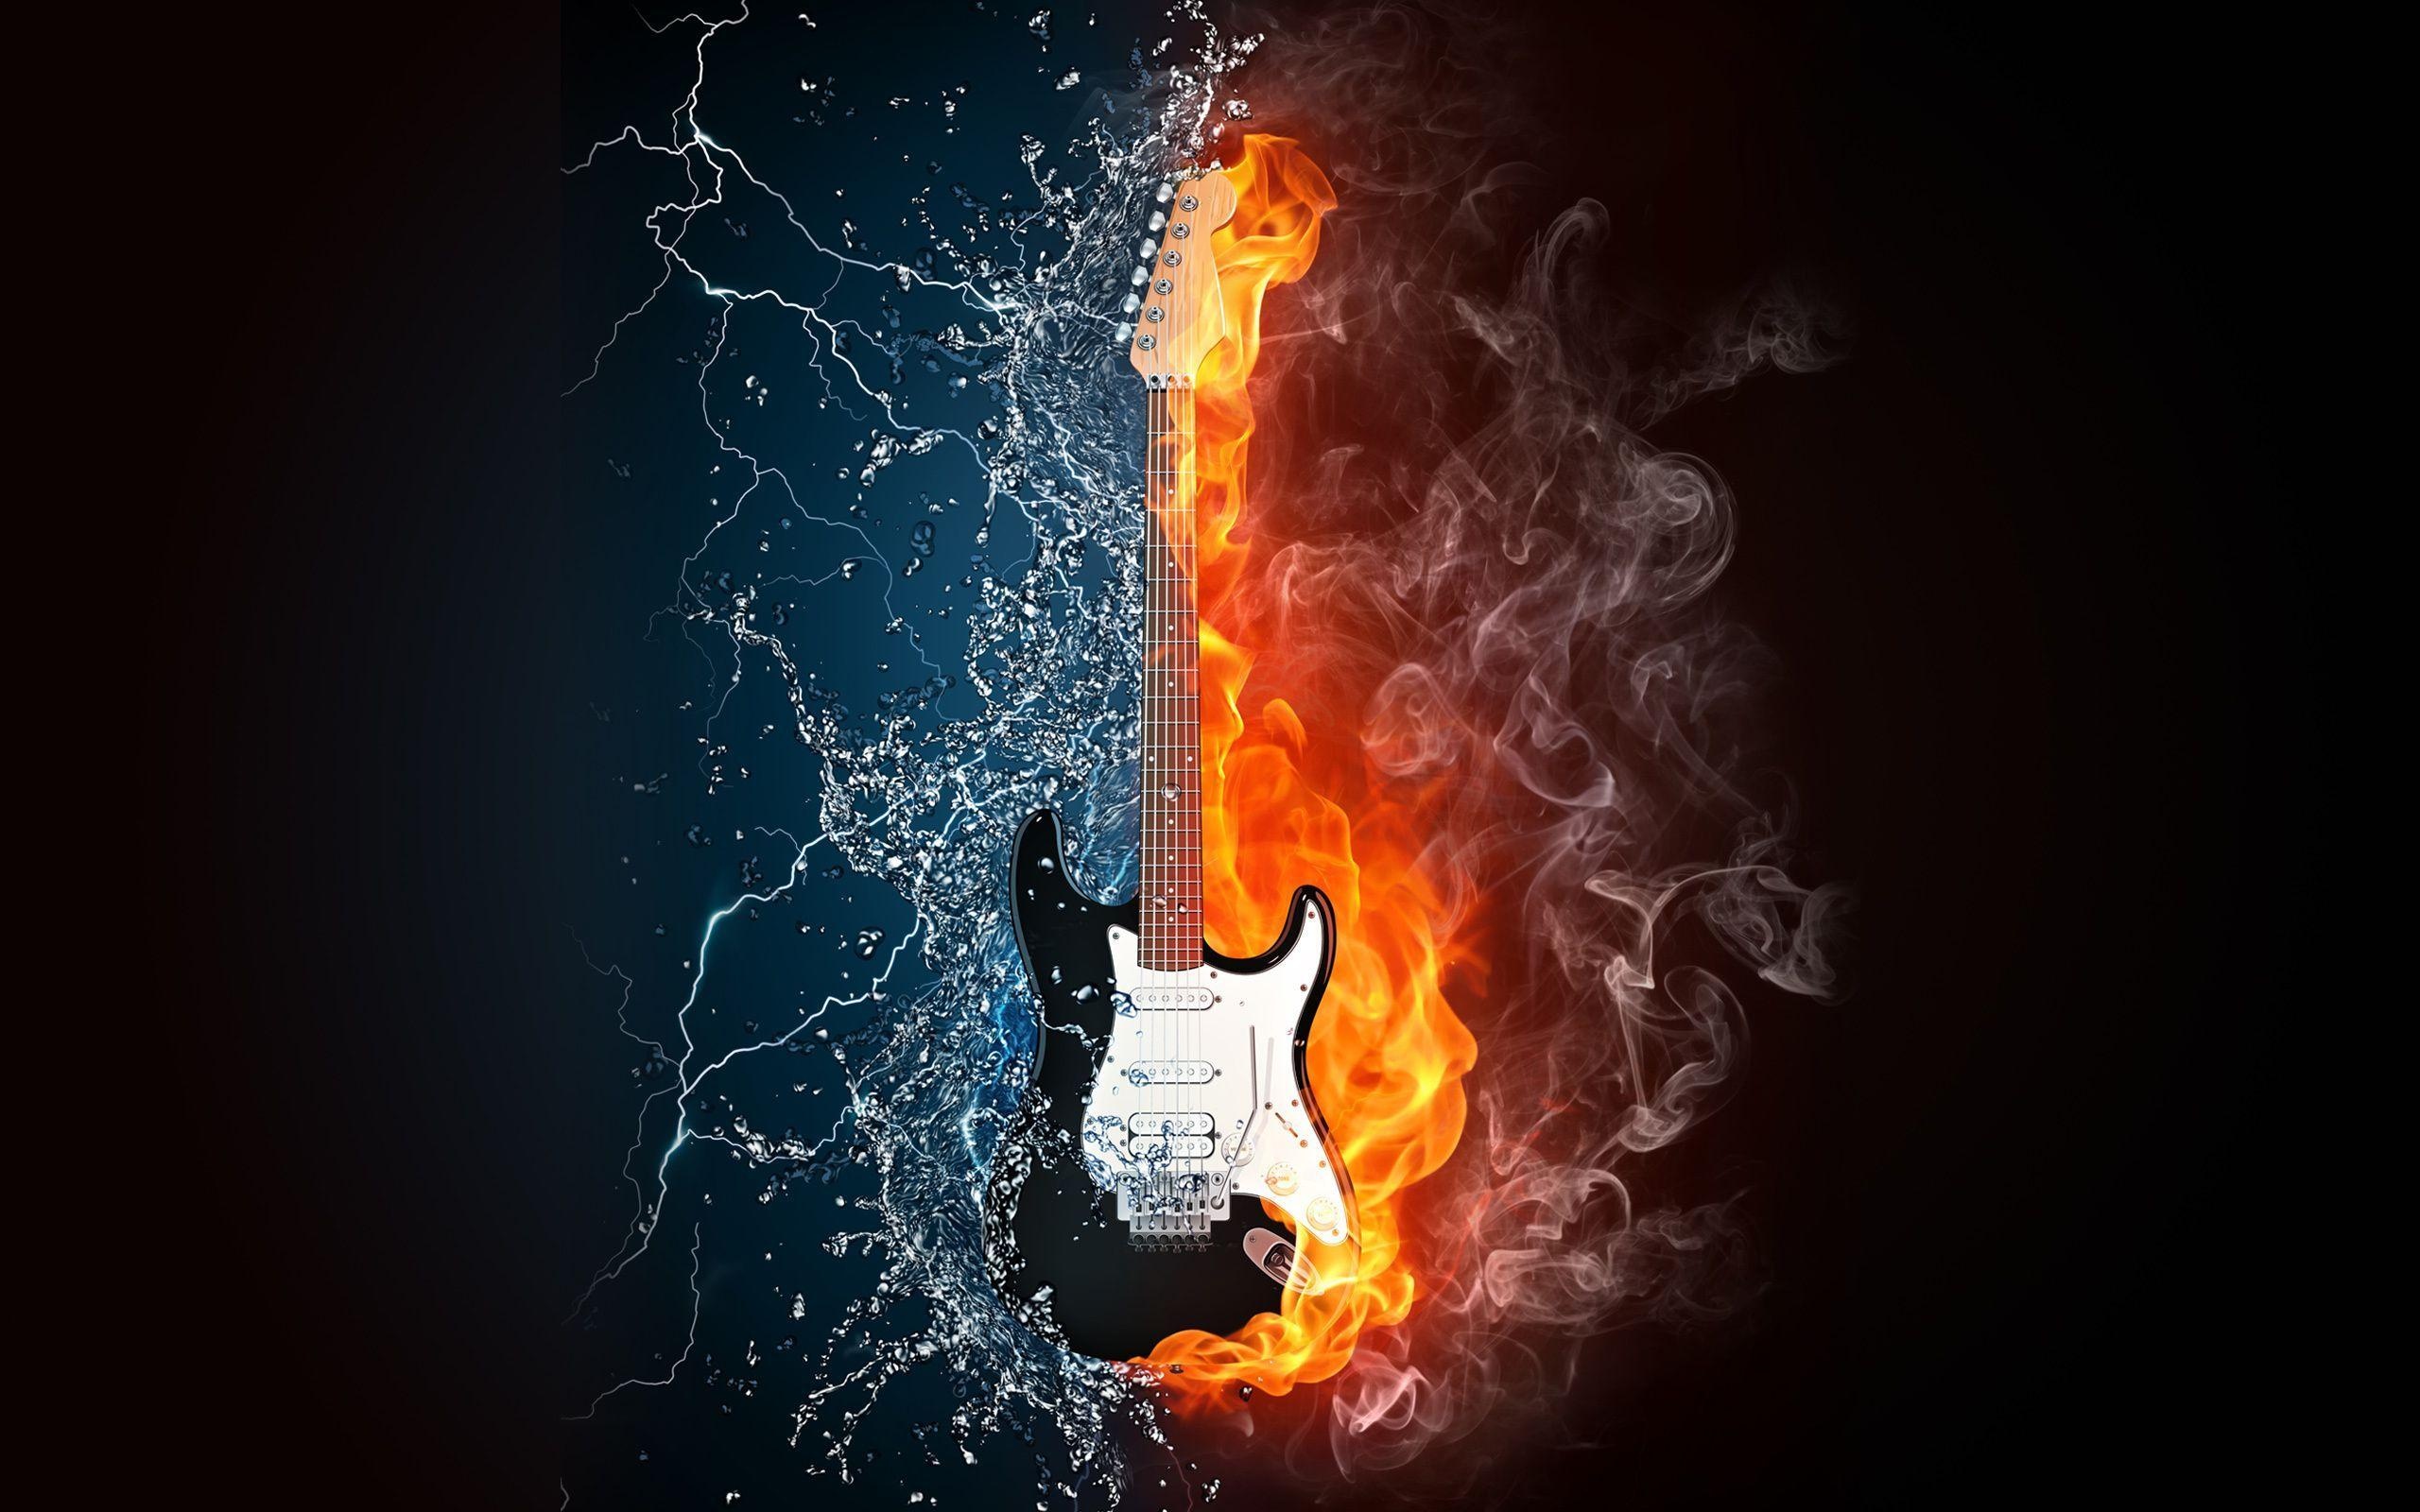 Guitar on fire, collection, Fiery music, Rock and roll, 2560x1600 HD Desktop